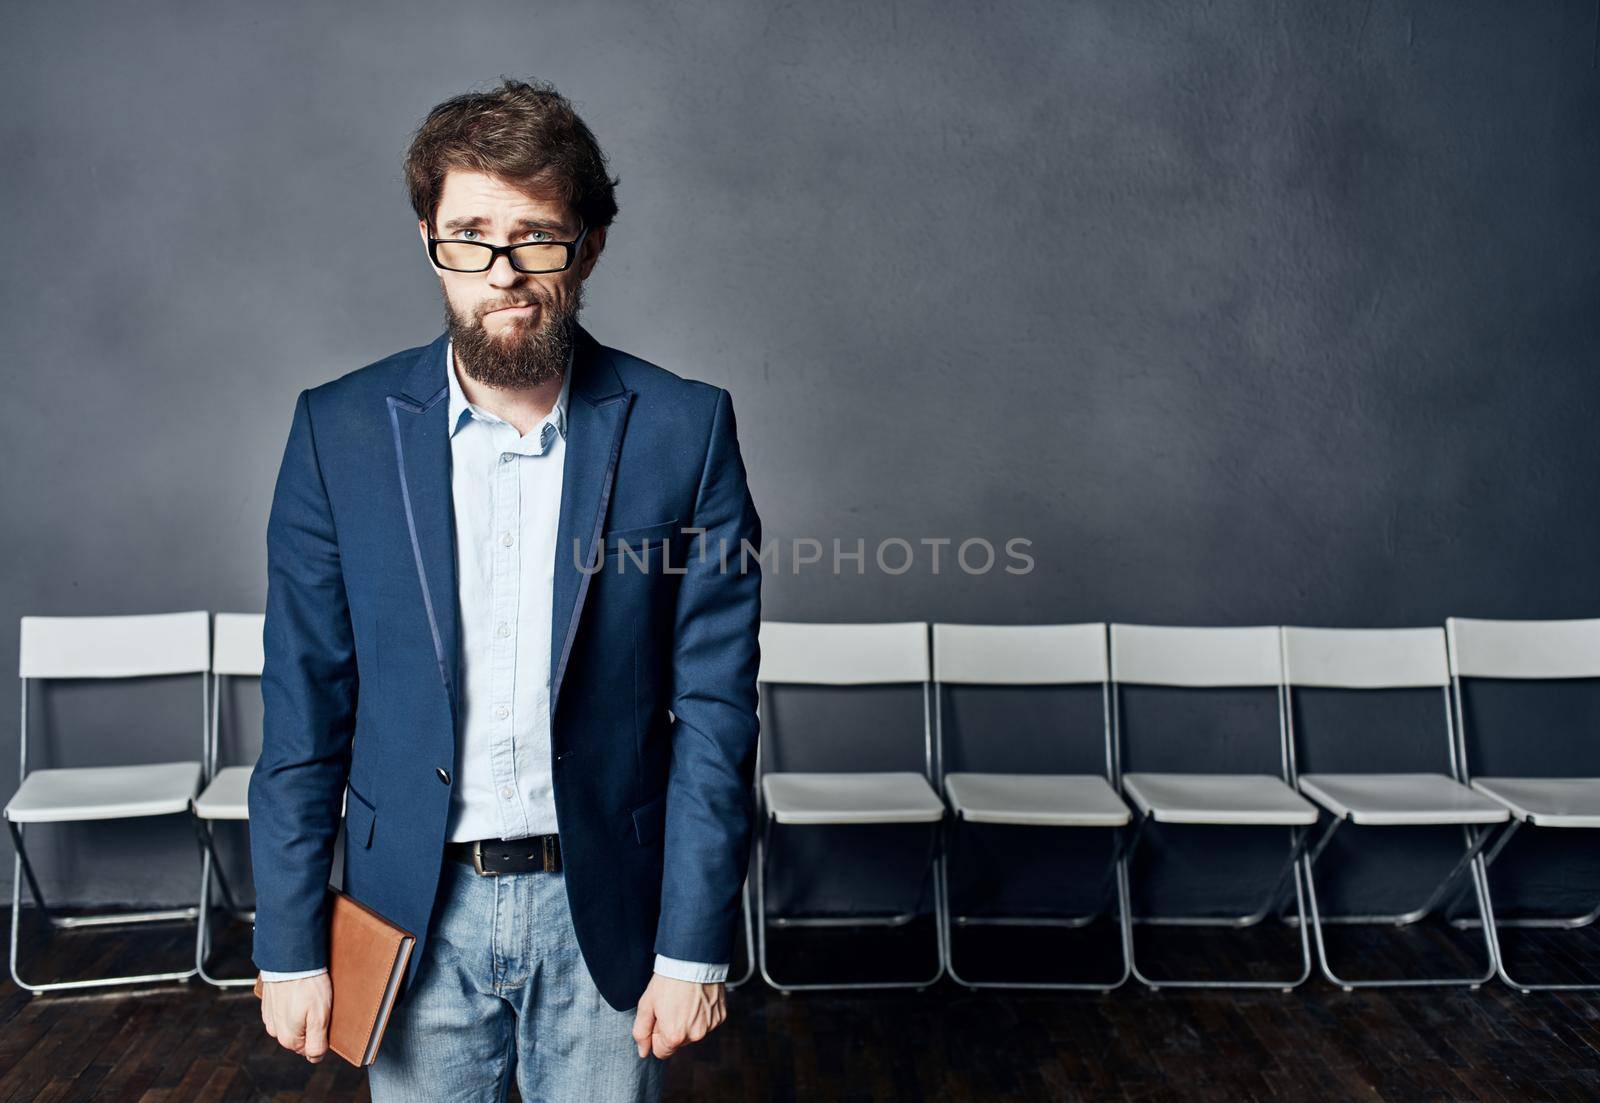 Man in suit waiting for job interview emotions job Professional. High quality photo